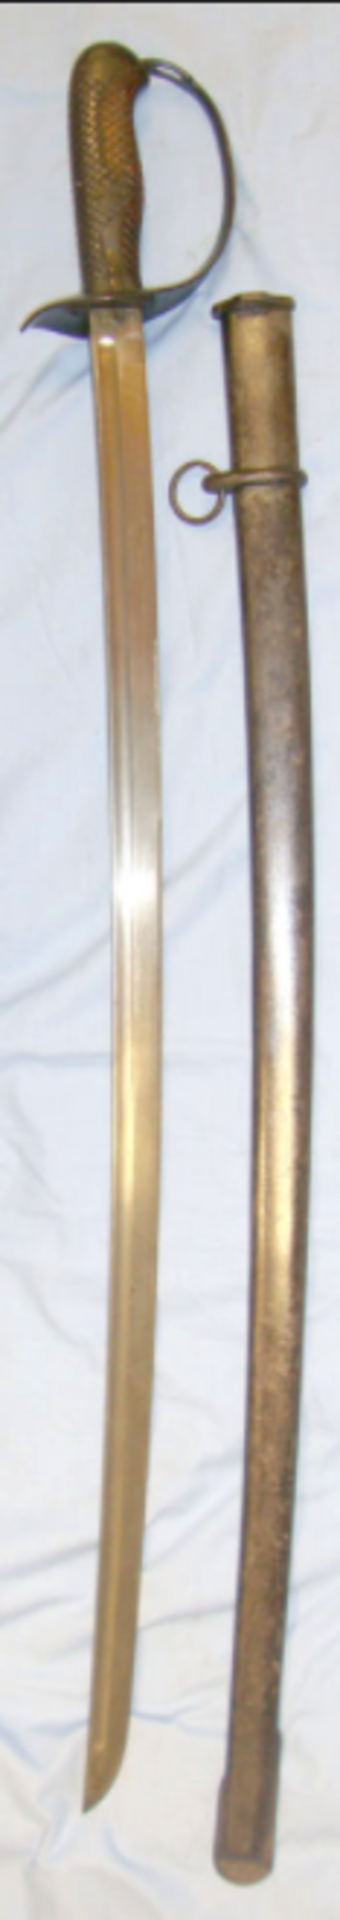 WW2 Japanese Cavalry Trooper's / Mounted Police Sword & Scabbard. Sn 8068 8068 A great condition,